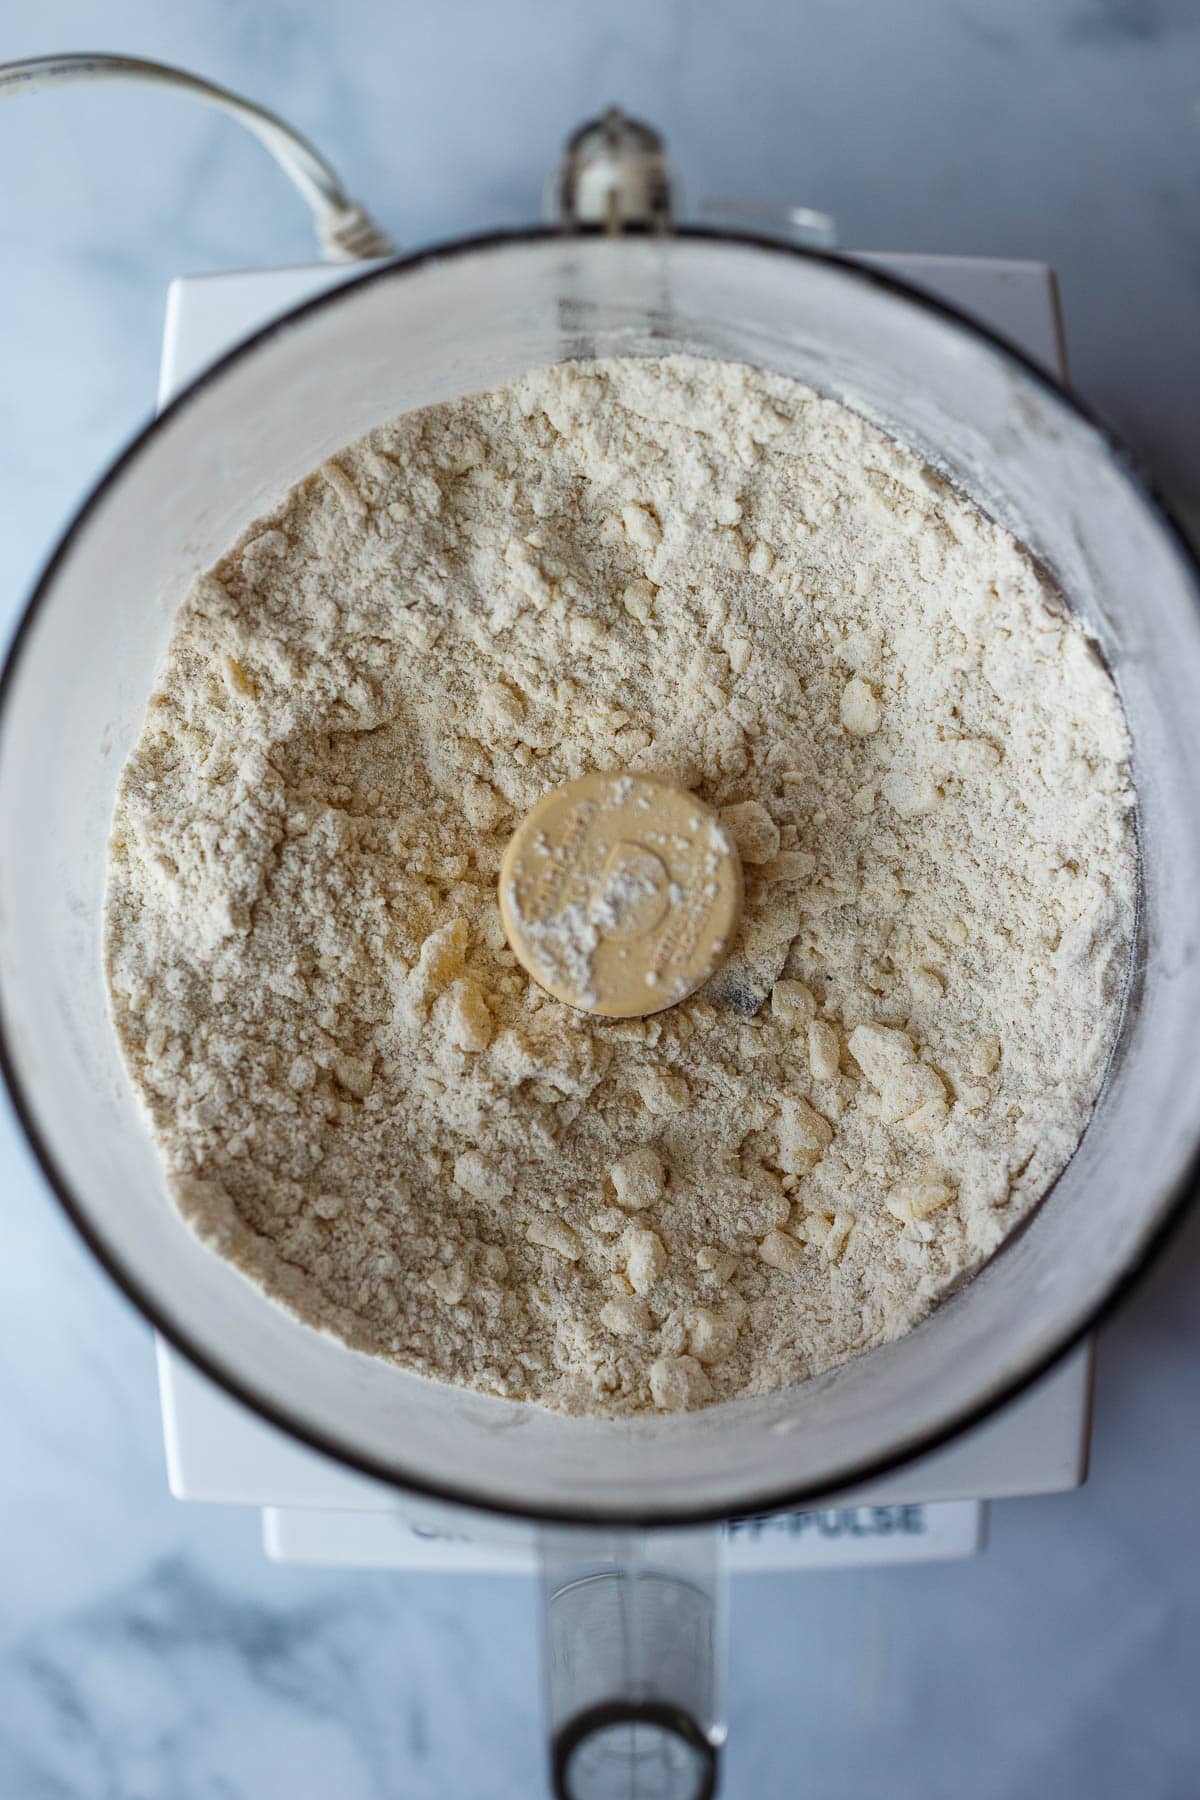 Food processor with crust ingredients.